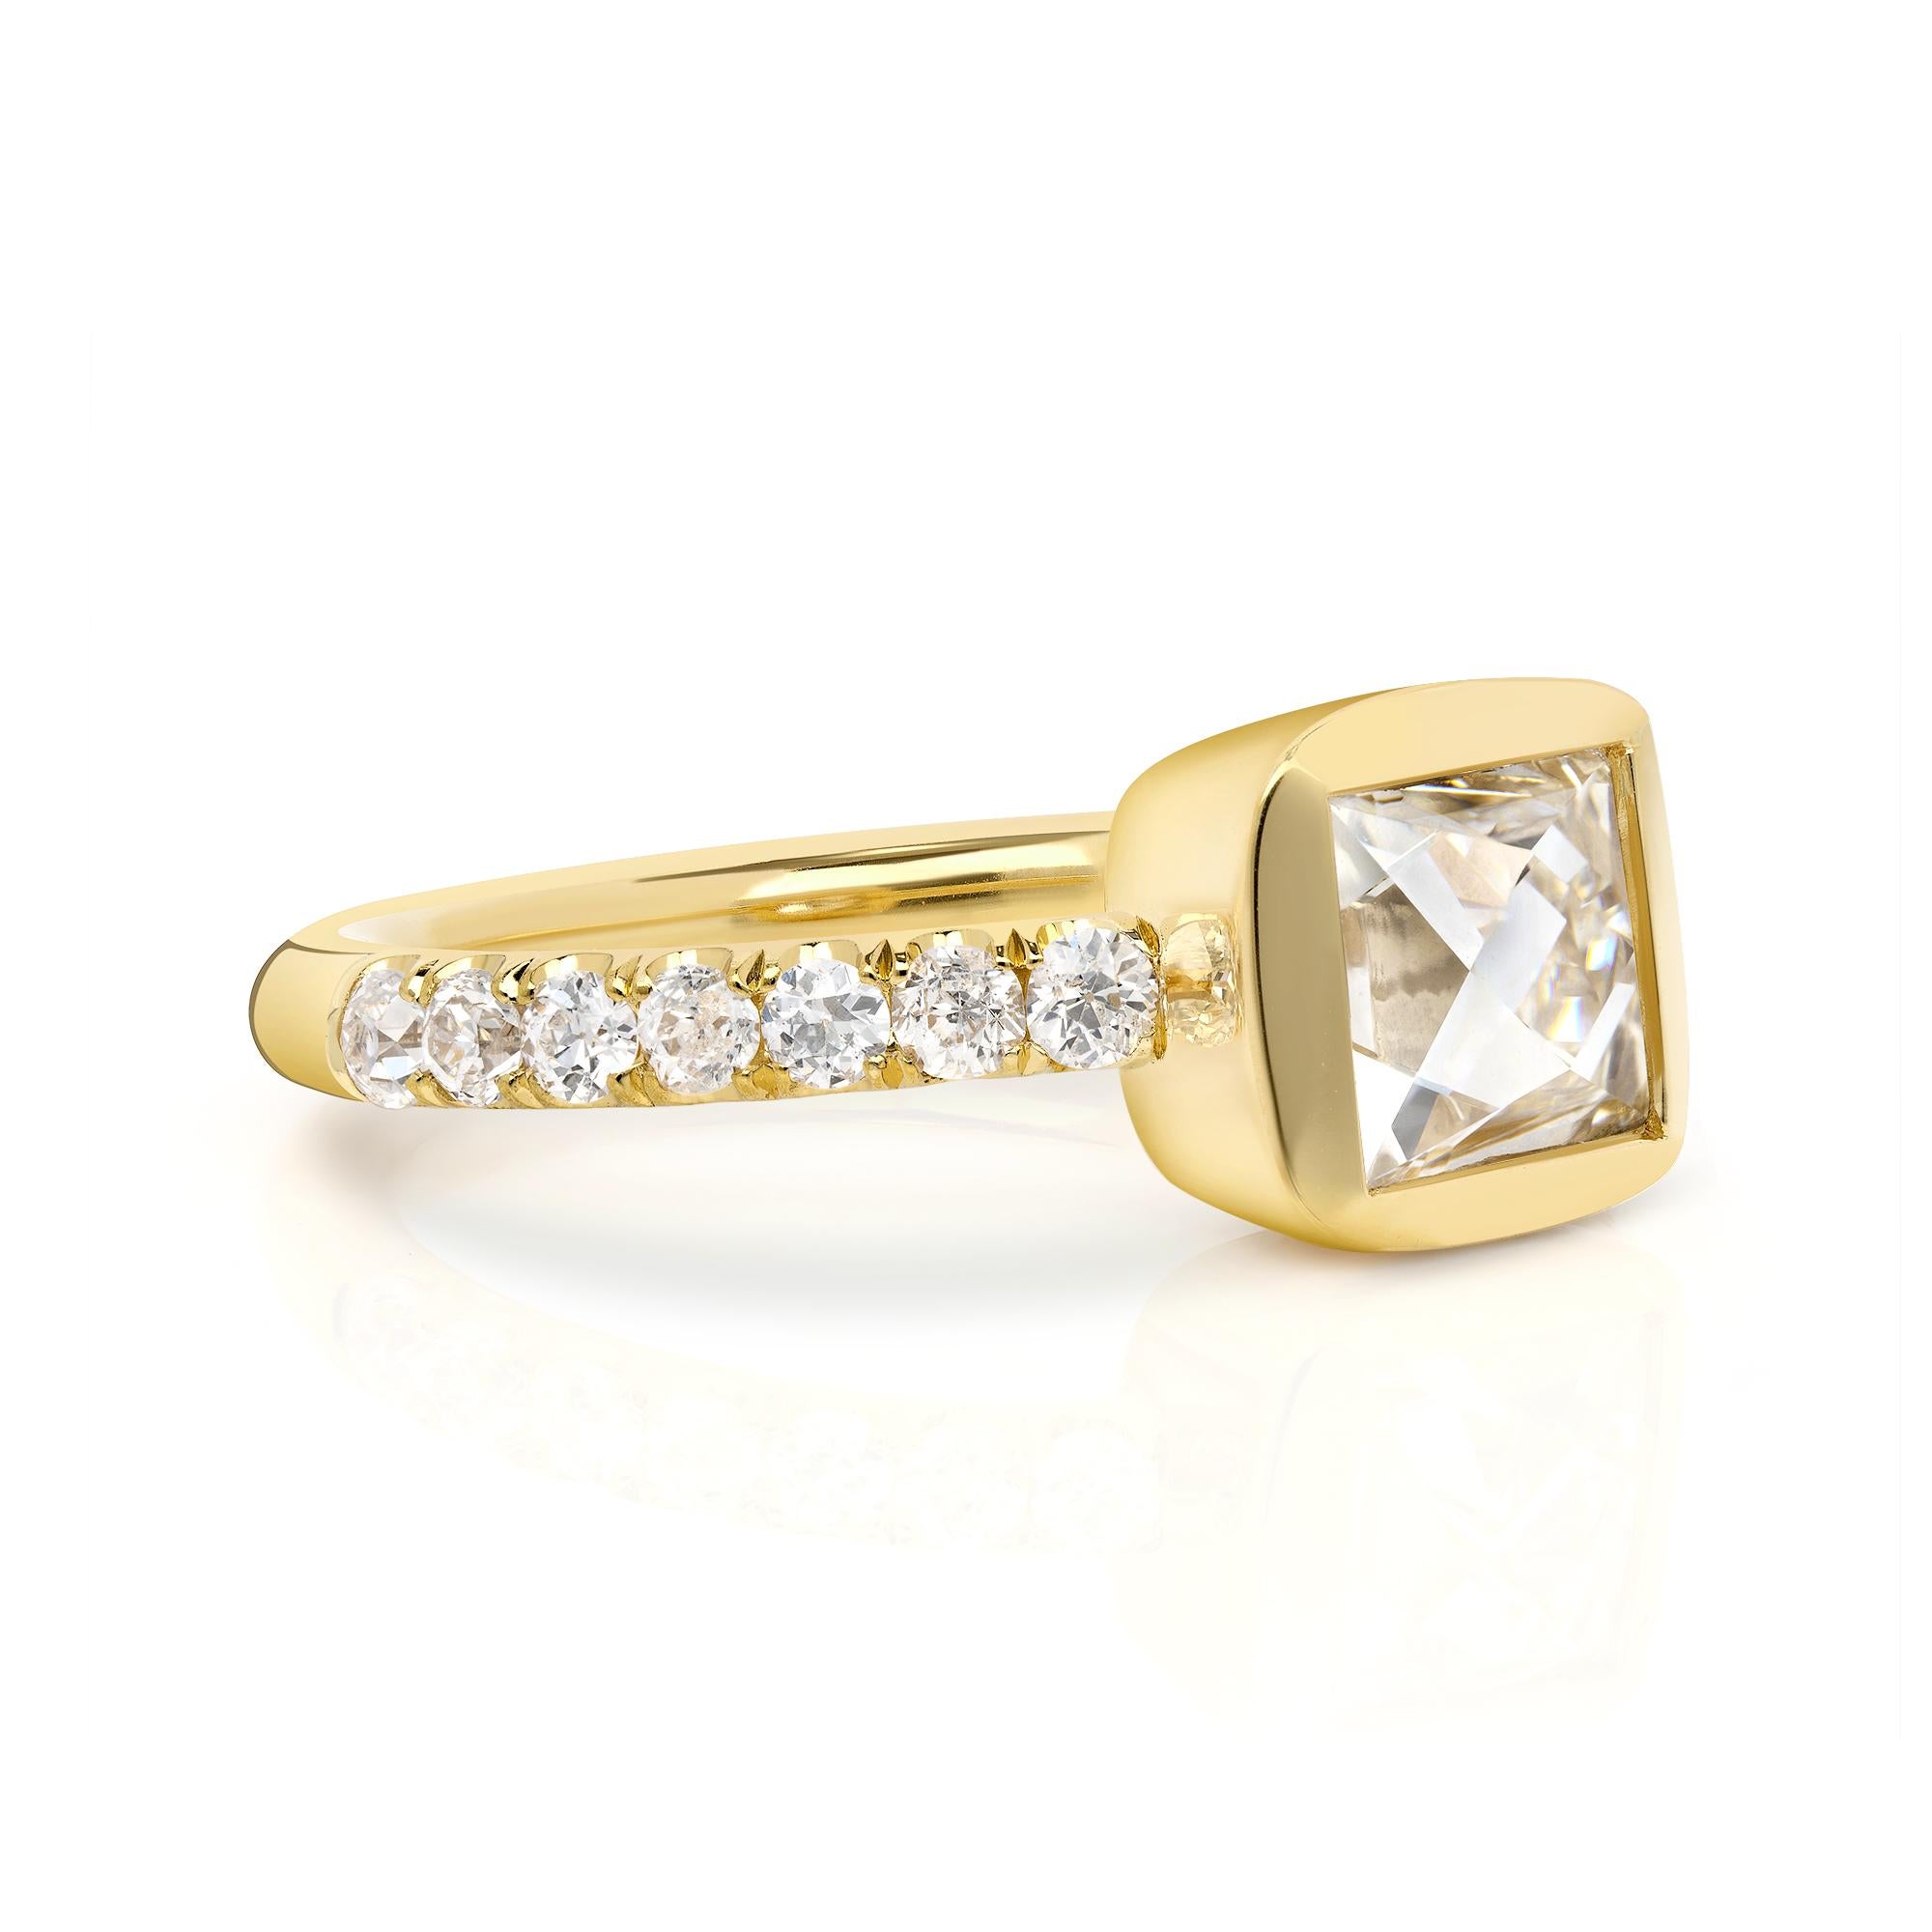 1.39ct J/VS1 GIA certified French cut diamond with 0.43ctw old European cut accent diamonds set in a handcrafted 18K yellow gold mounting.

 